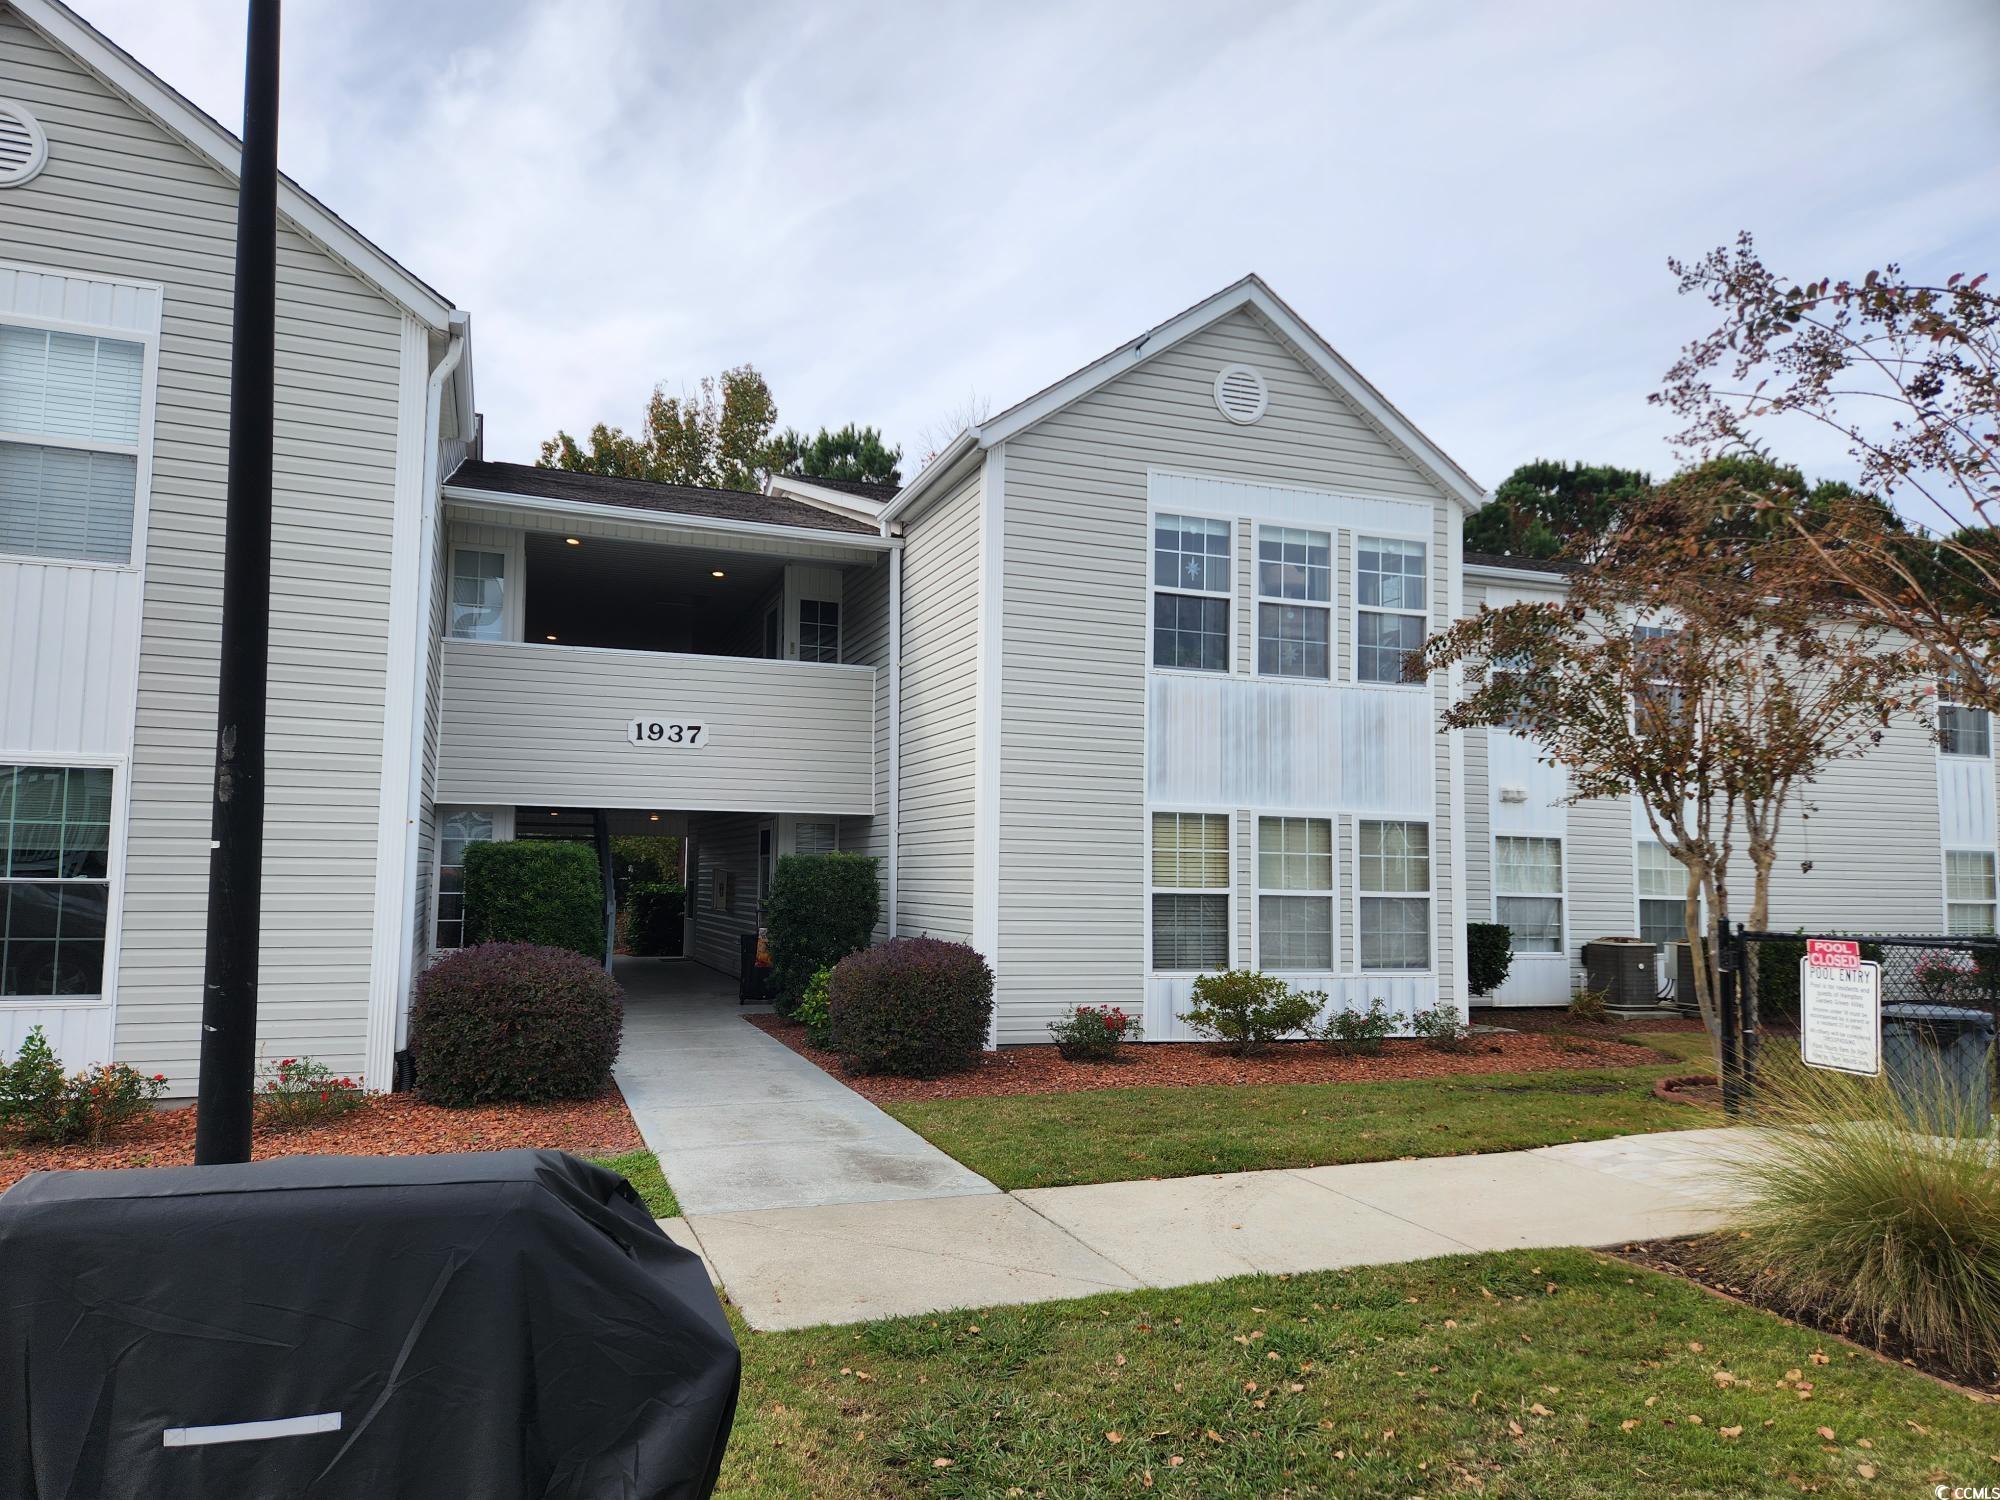 great location for this first floor 3 bed/2 bath unit in the community of hampton greens which is part of deerfield. just on the west side of 17 business in surfside, this property has easy access to food shopping, restaurants and of course the beach! you can access this community from both 17 bypass and 17 business depending on where you would like to go. the community pool is just outside your door and is shared by just a few buildings. this property needs cosmetic work to be done to make it yours! square footage is approximate and not guaranteed. buyer is responsible for verification.